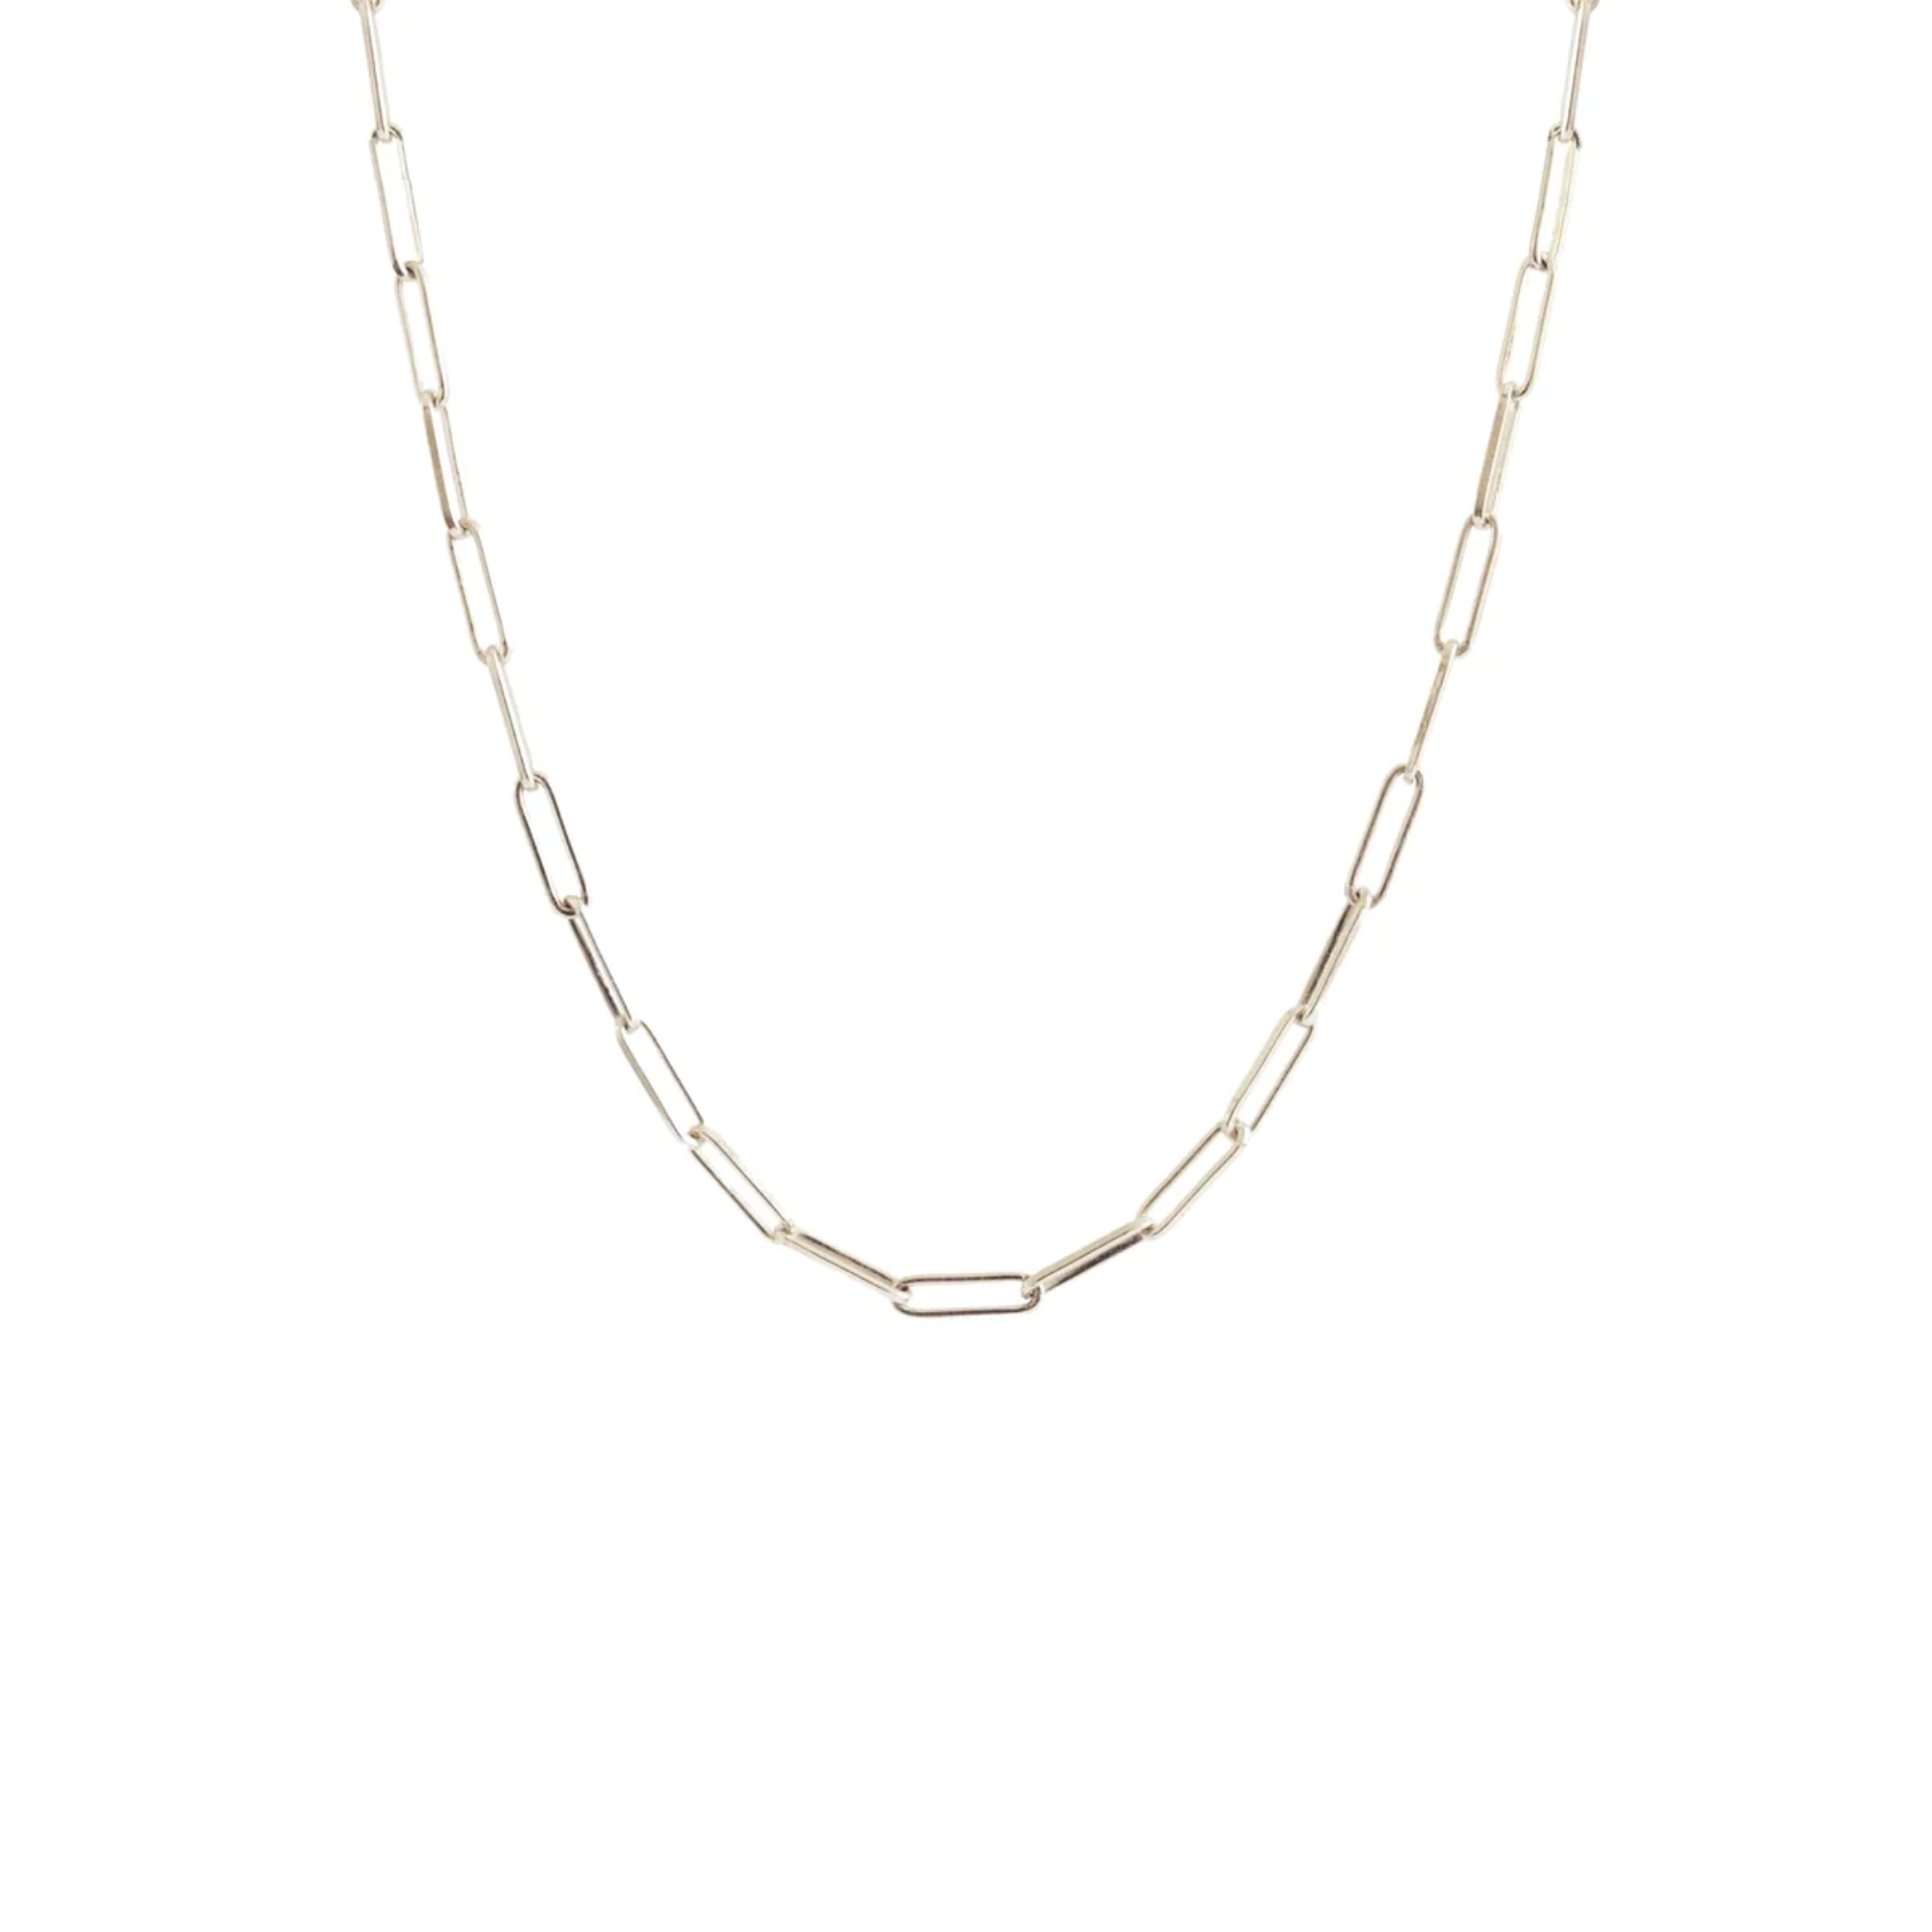 Poise Short Oval Link Necklace - Silver